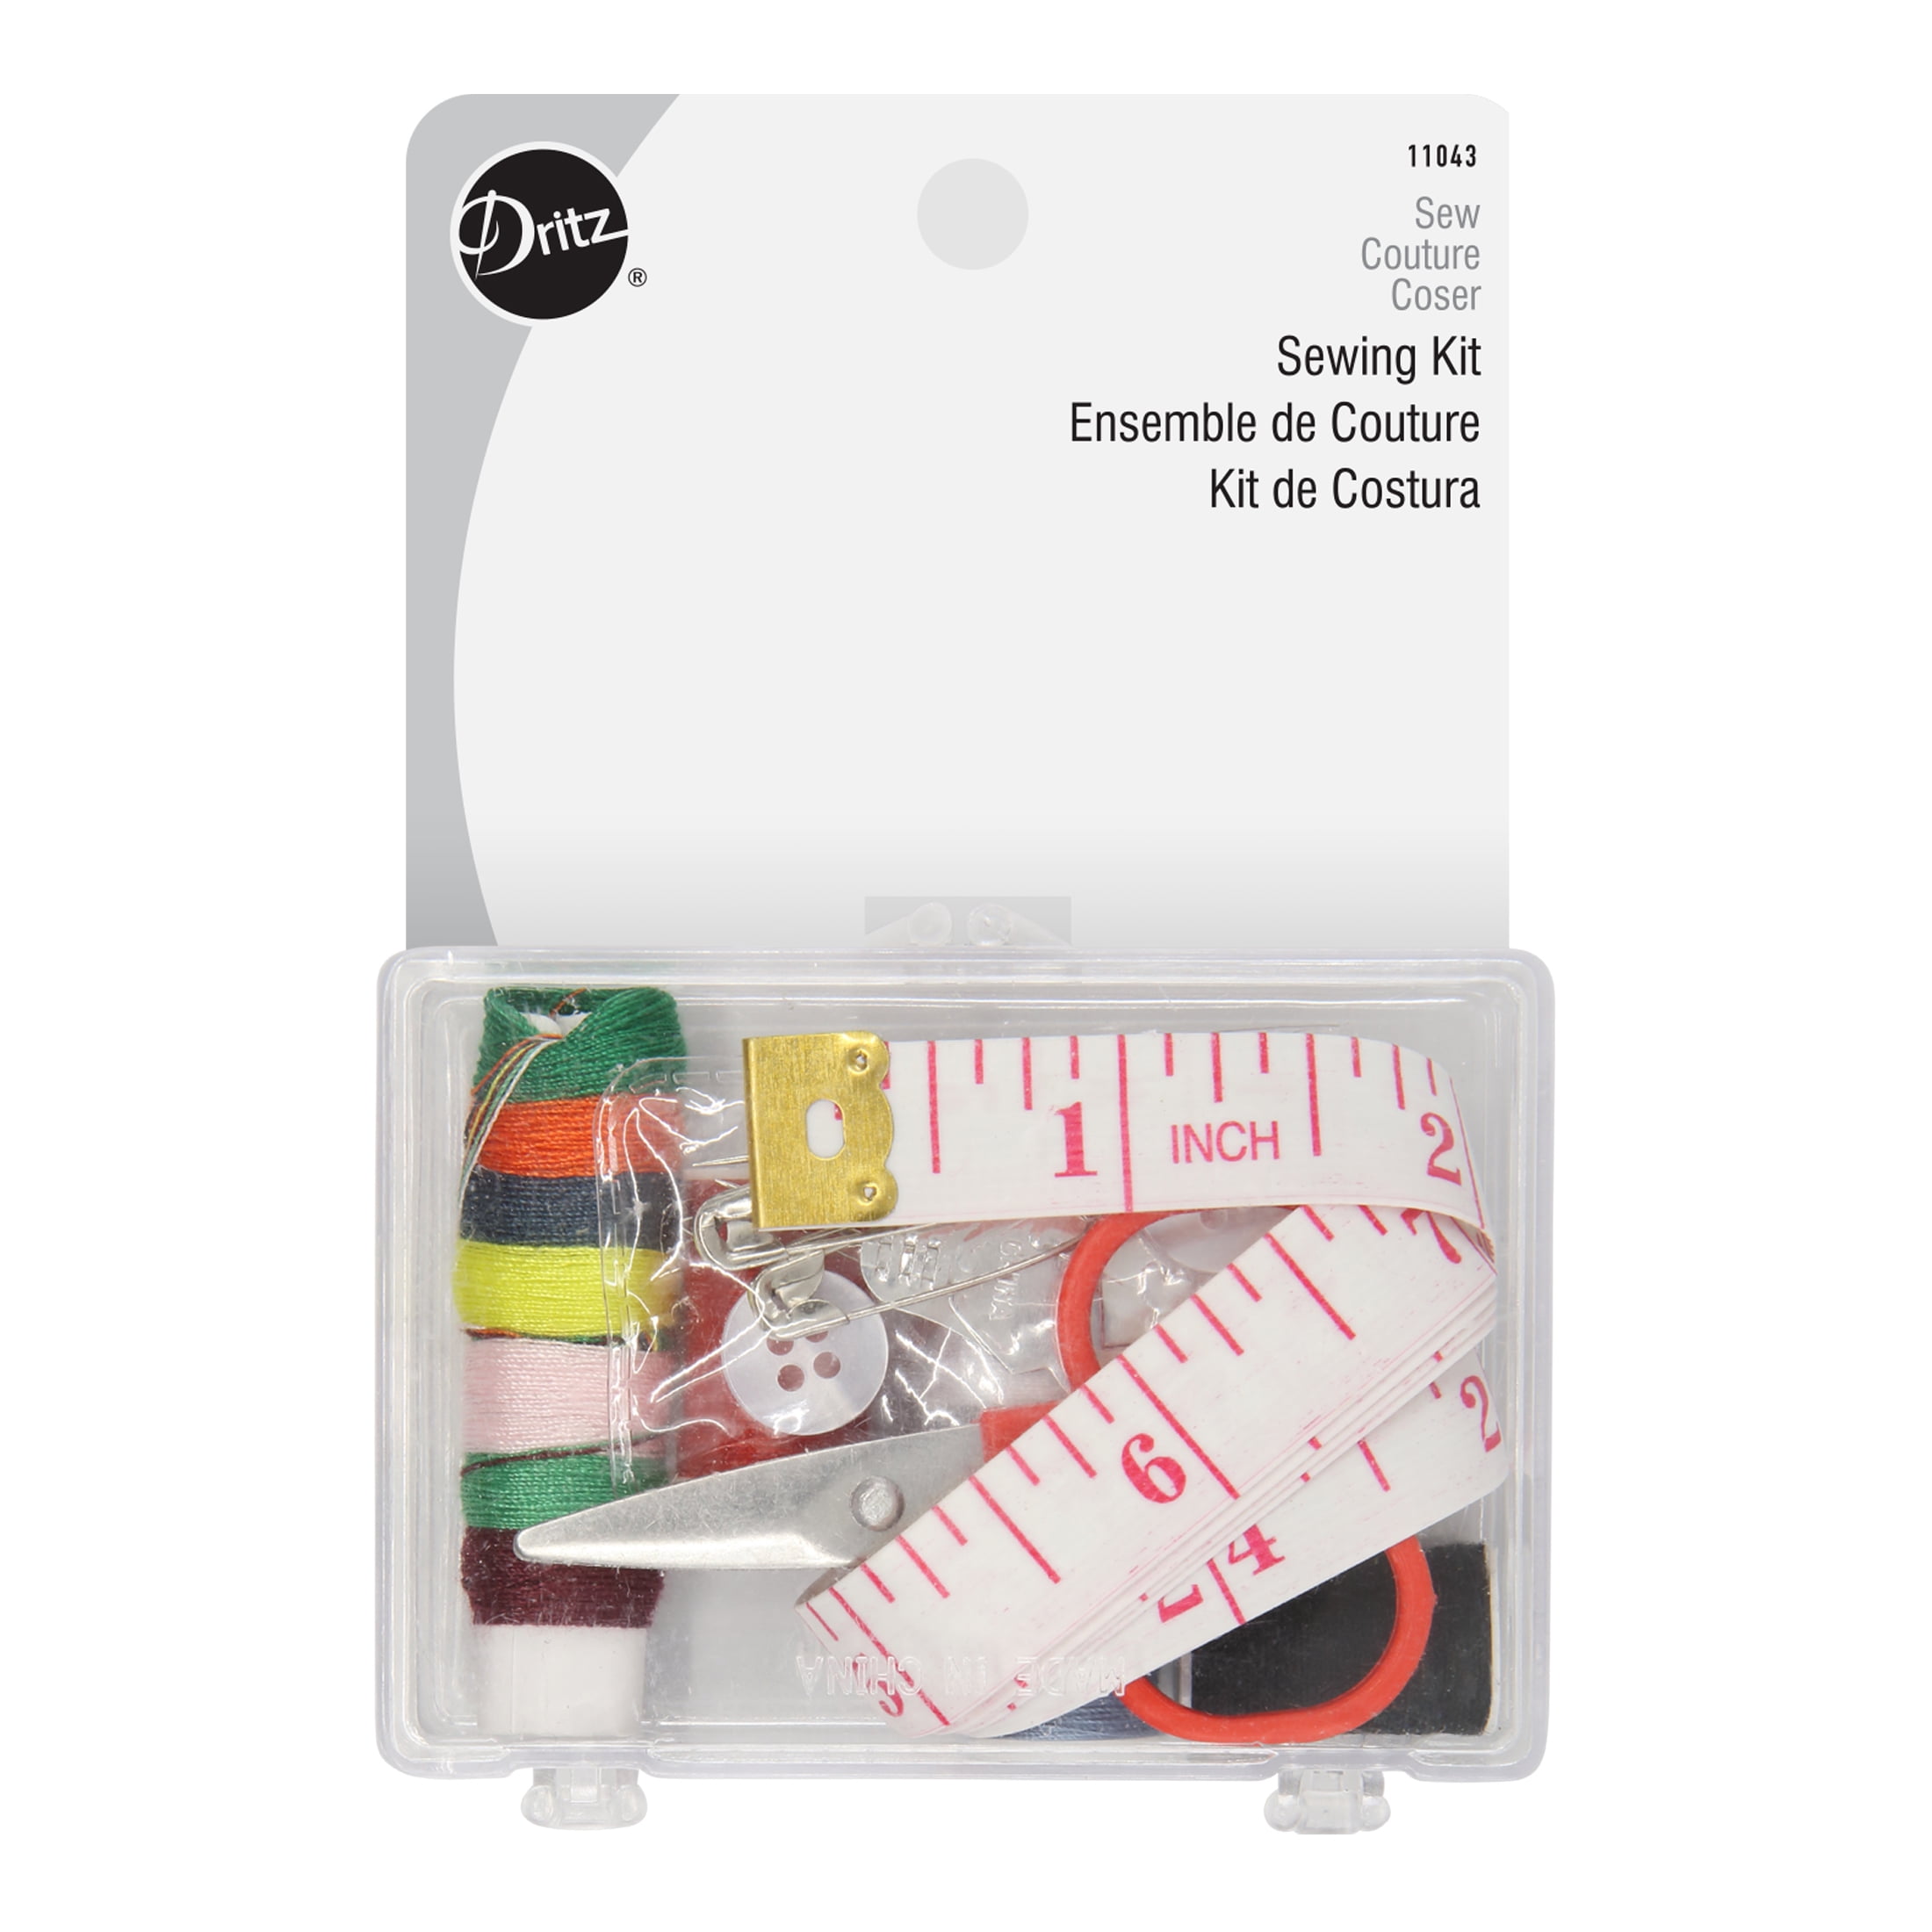 eZthings Sewing Accessories Replenishment Kits for Arts and Crafts